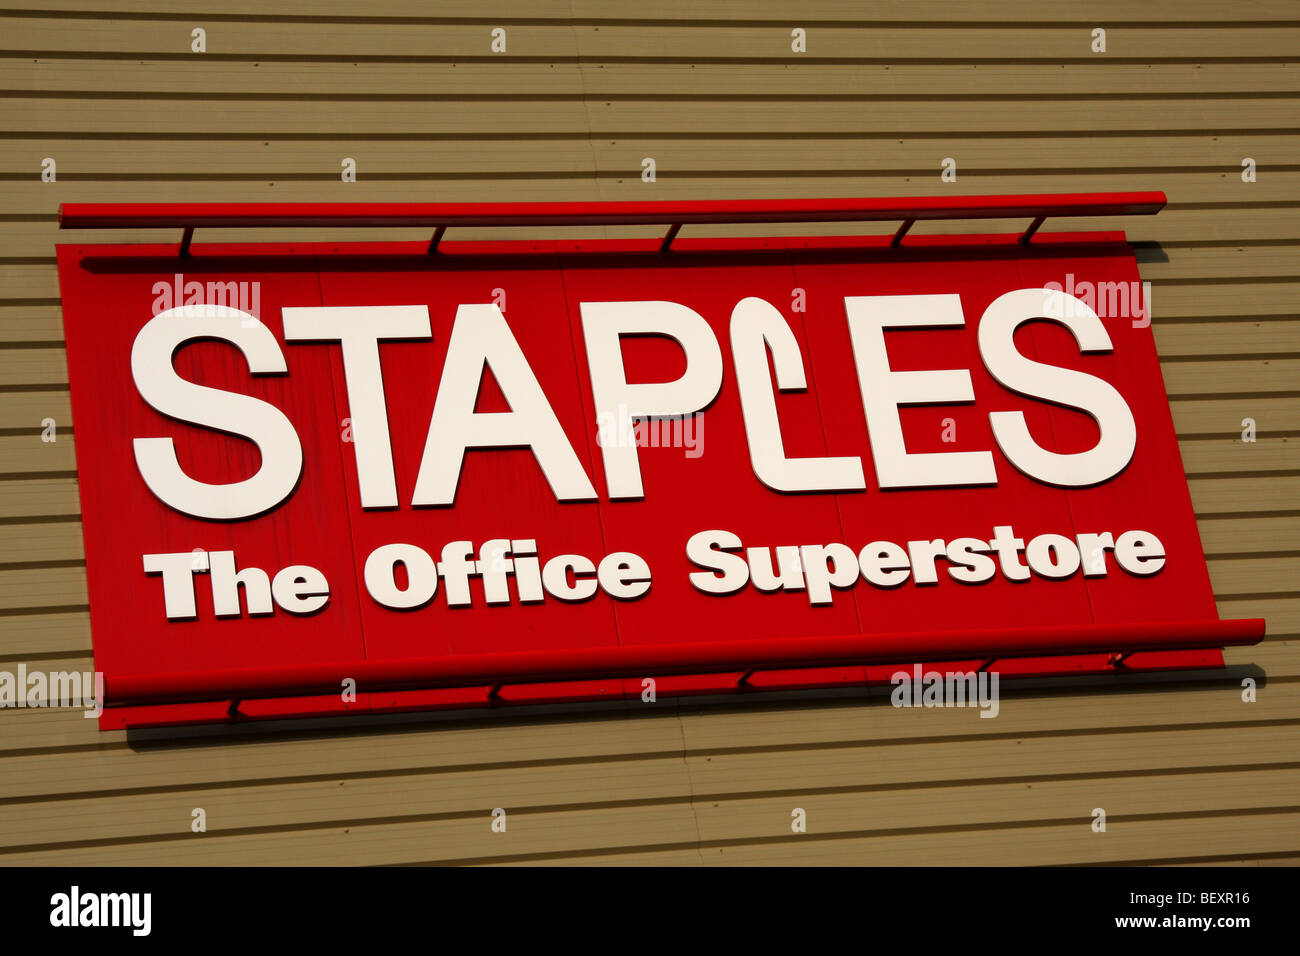 Sign on Staples office supplies store Stock Photo